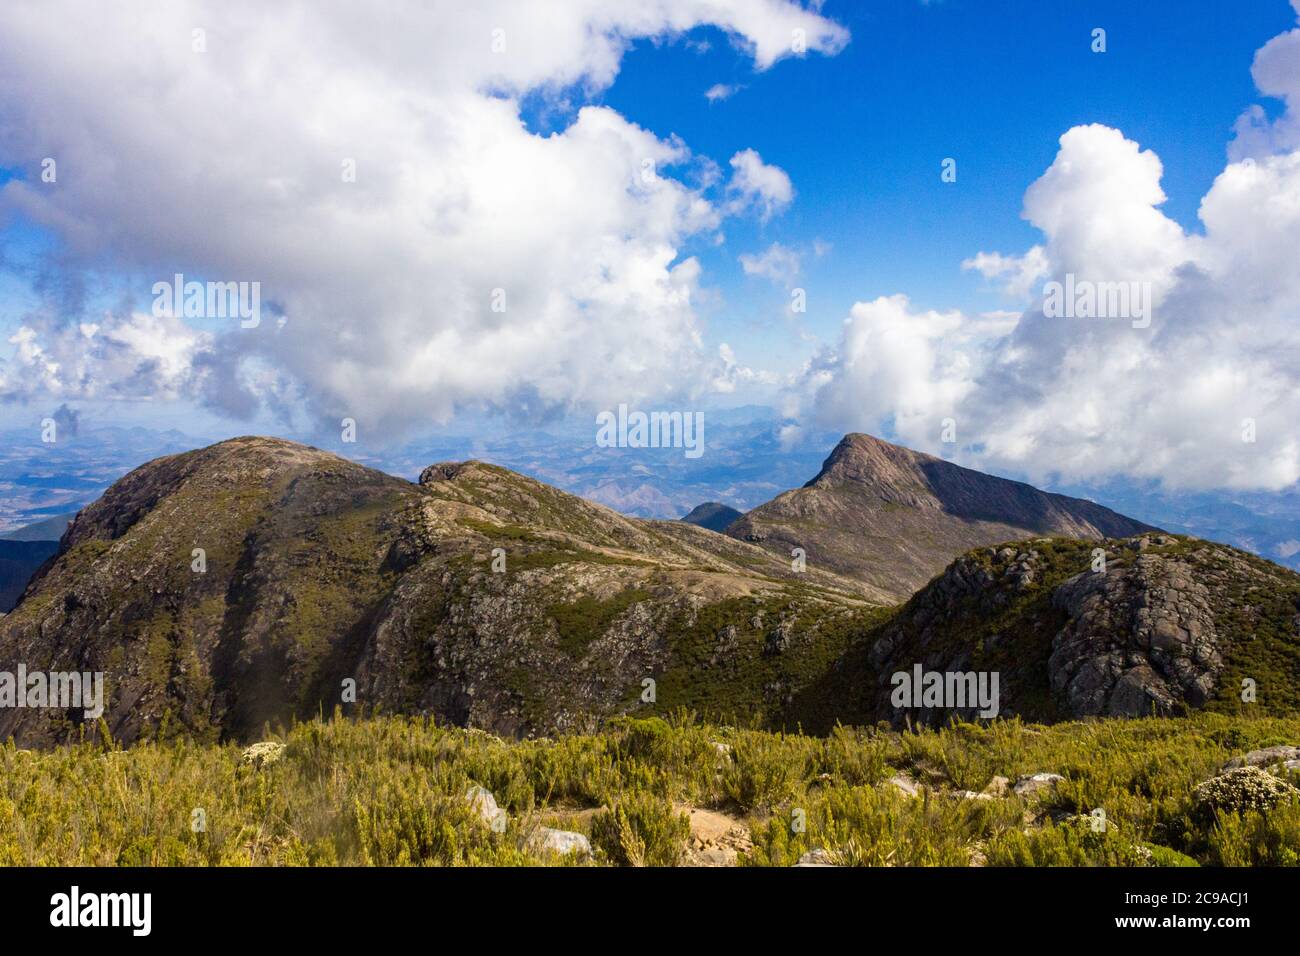 View from up in Pico da bandeira, the third highest peak in Brazil, which is in the state of Espirito Santo Stock Photo